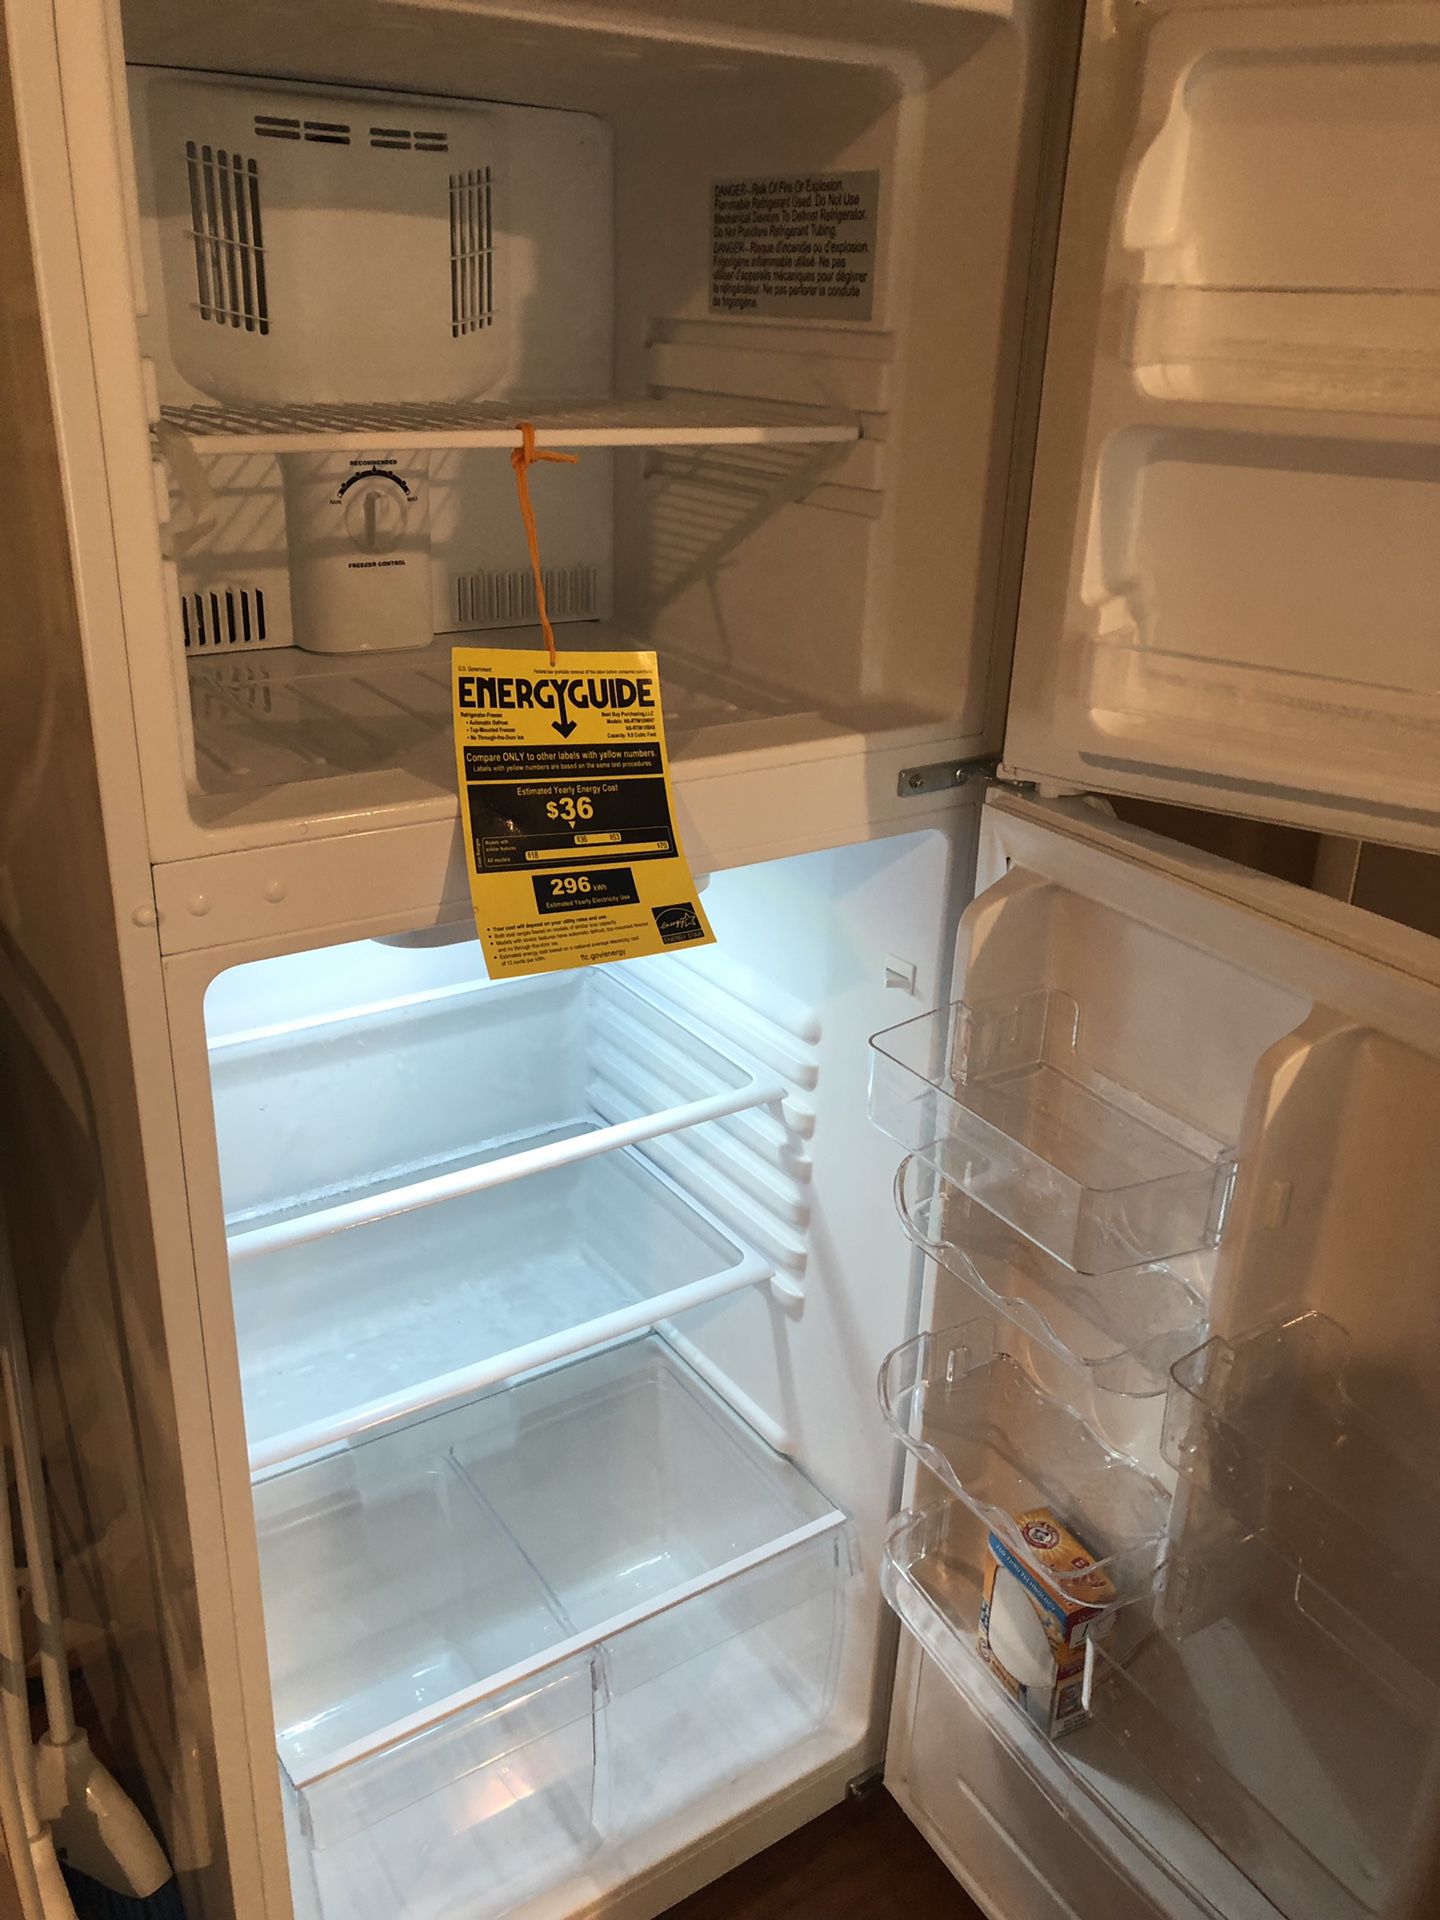 Practically New, 1 Year Old Fridge with Active Warranty